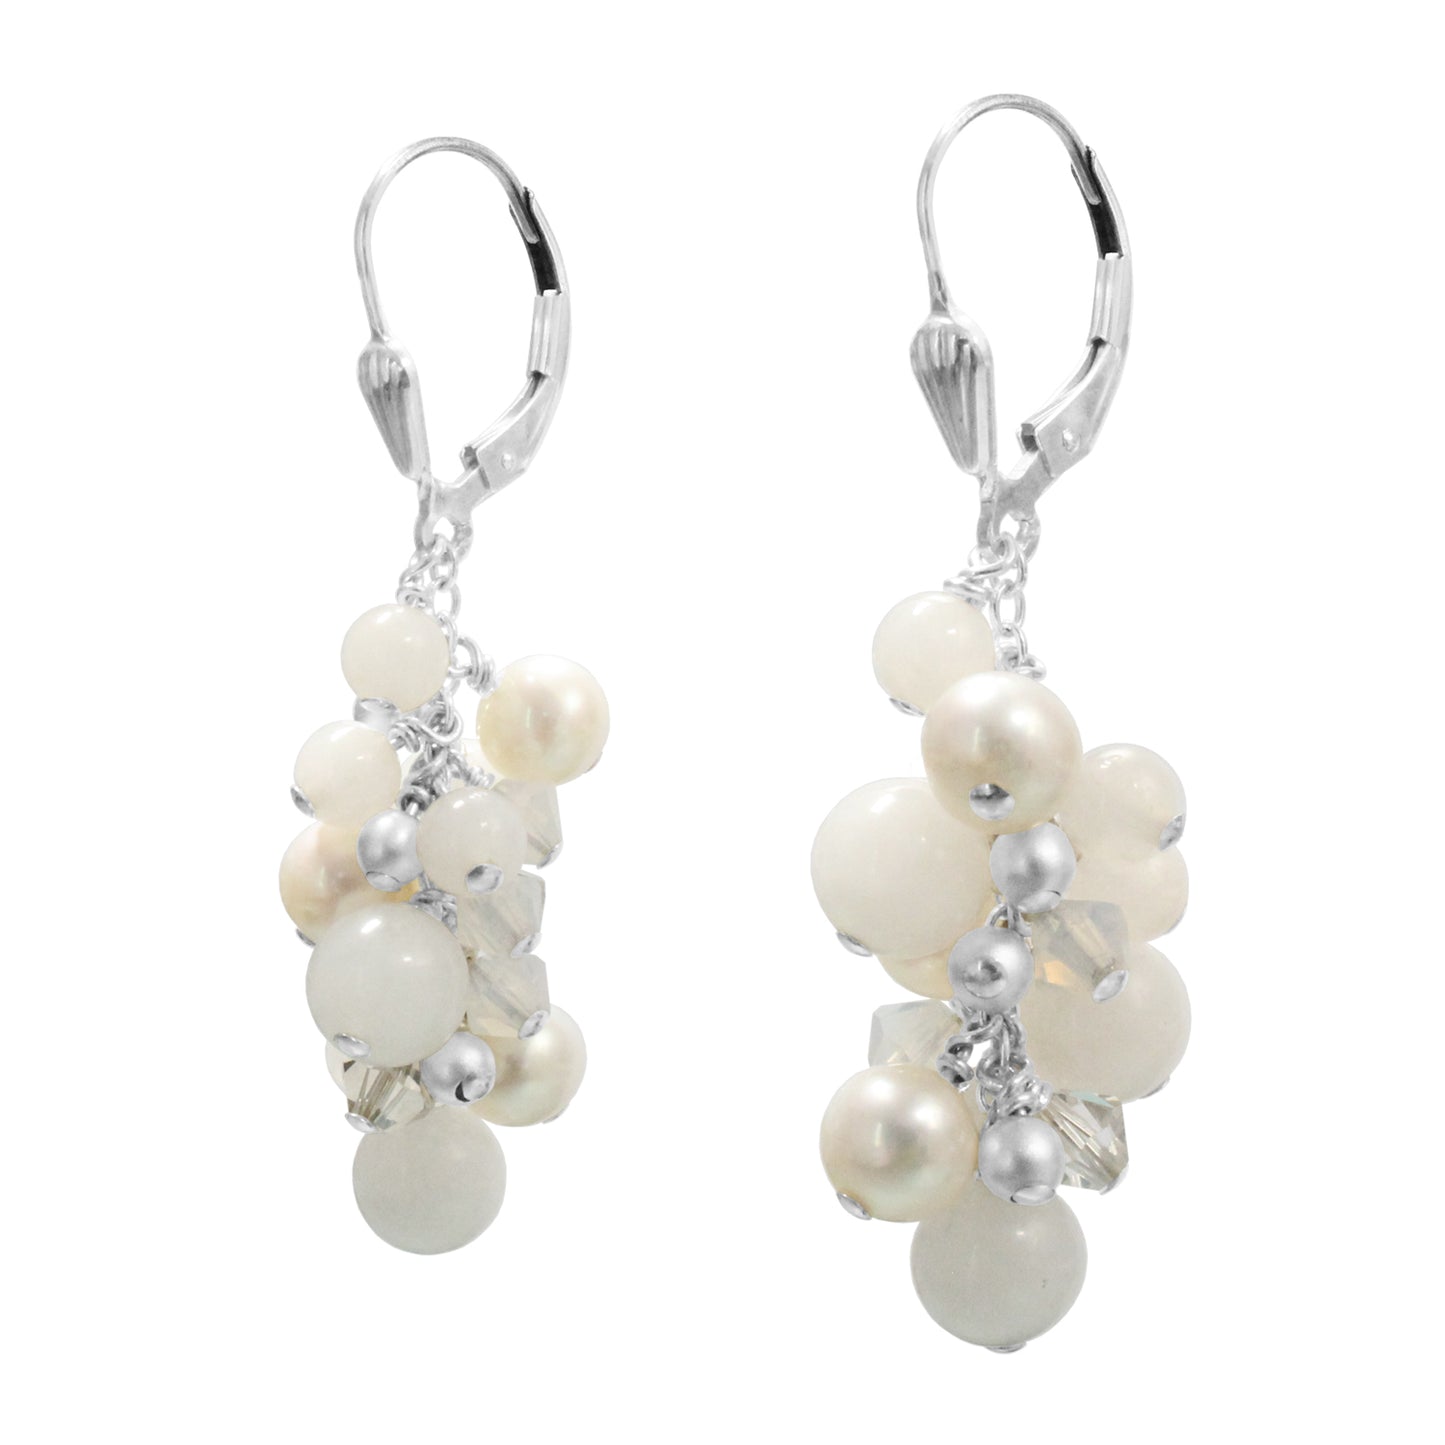 White Cascade Earrings / 48mm length / snow jade, pearls and crystal, sterling silver leverback earwires